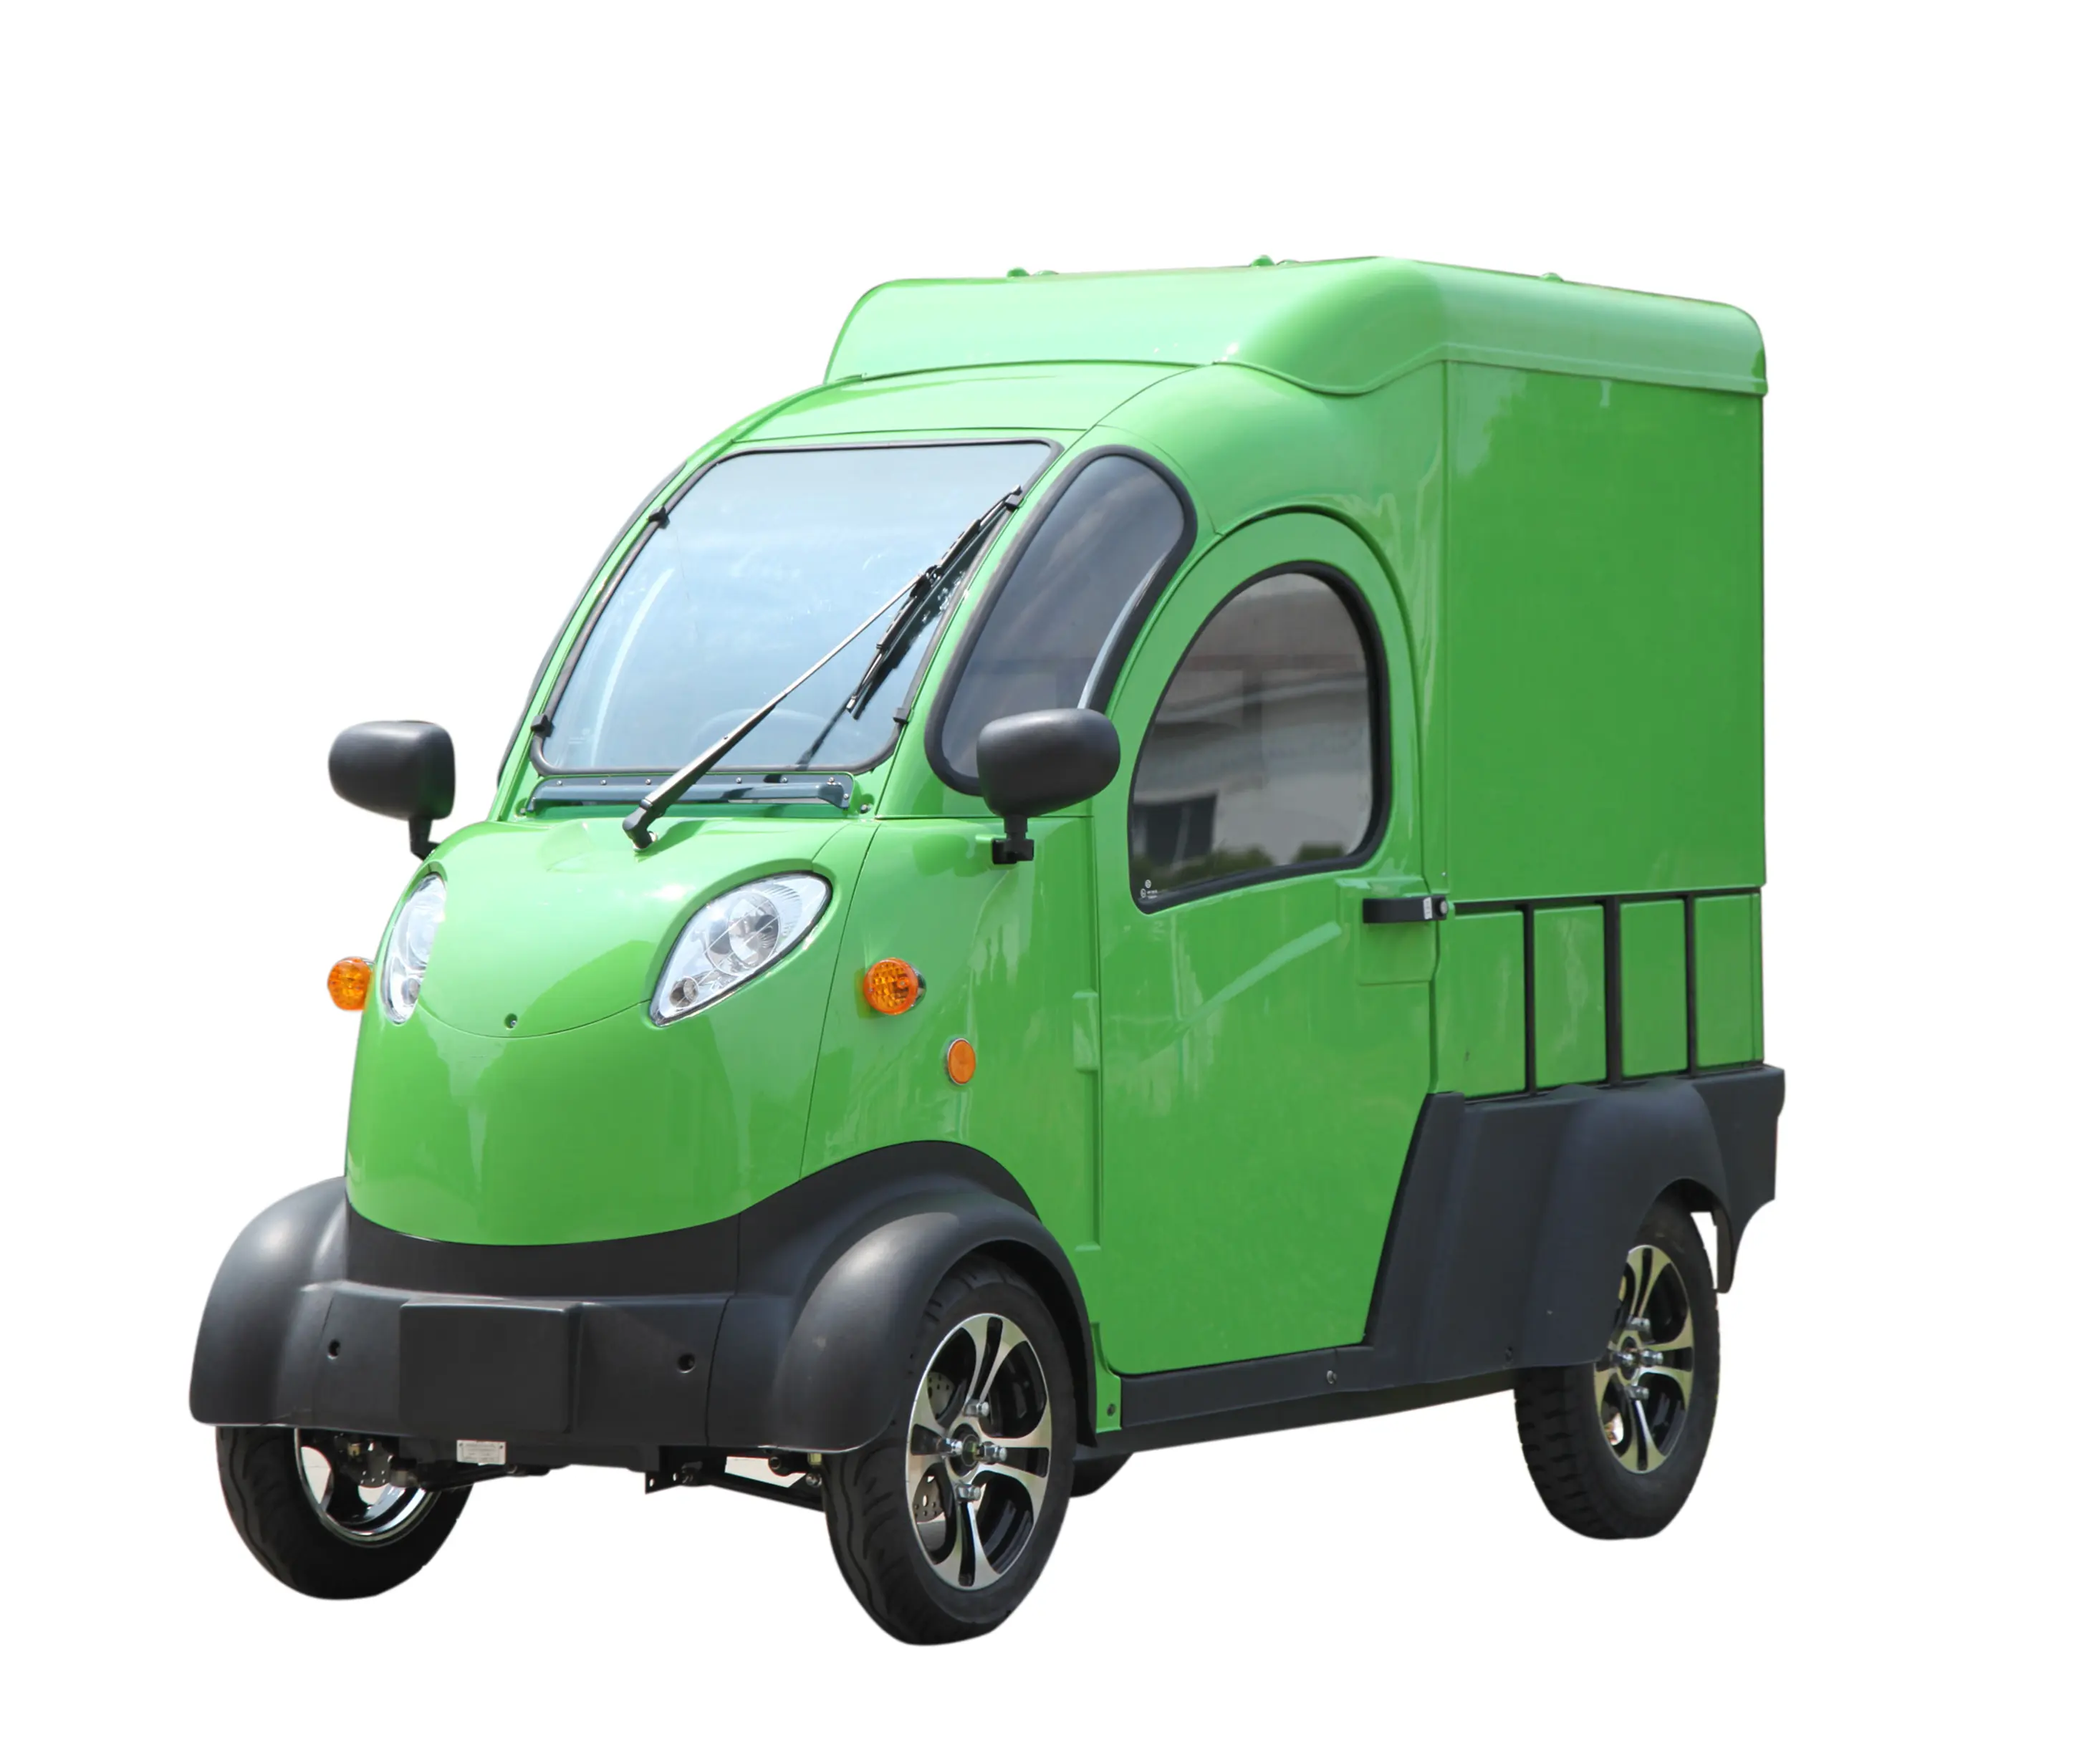 New 2021 China 60km 46km/h Cargo Box 0.78CB Van Delivery Family Electric Car